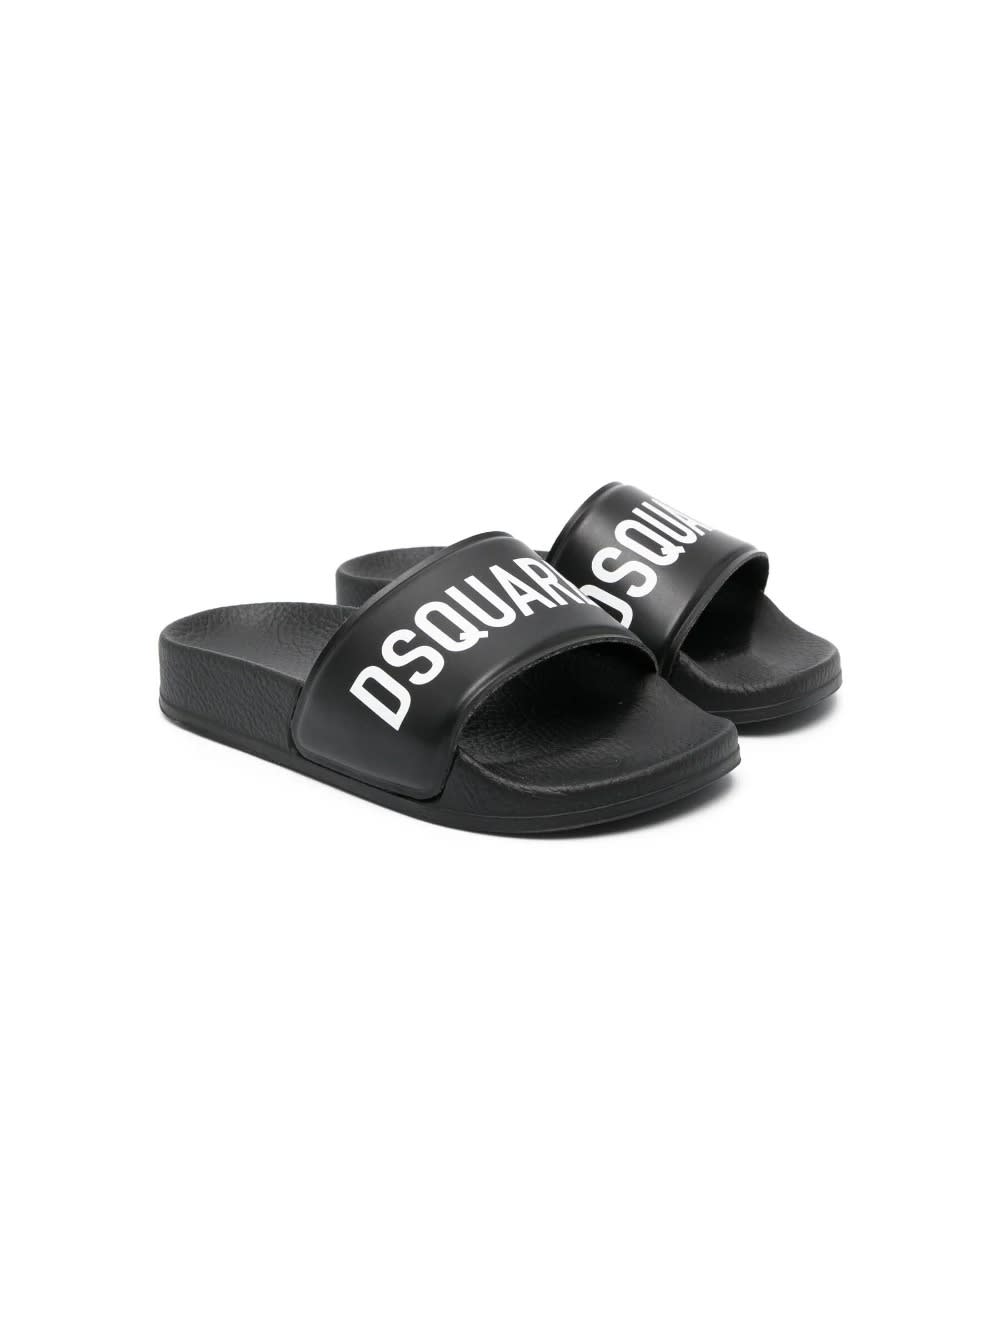 DSQUARED2 BLACK SLIPPERS WITH CONTRASTING LOGO